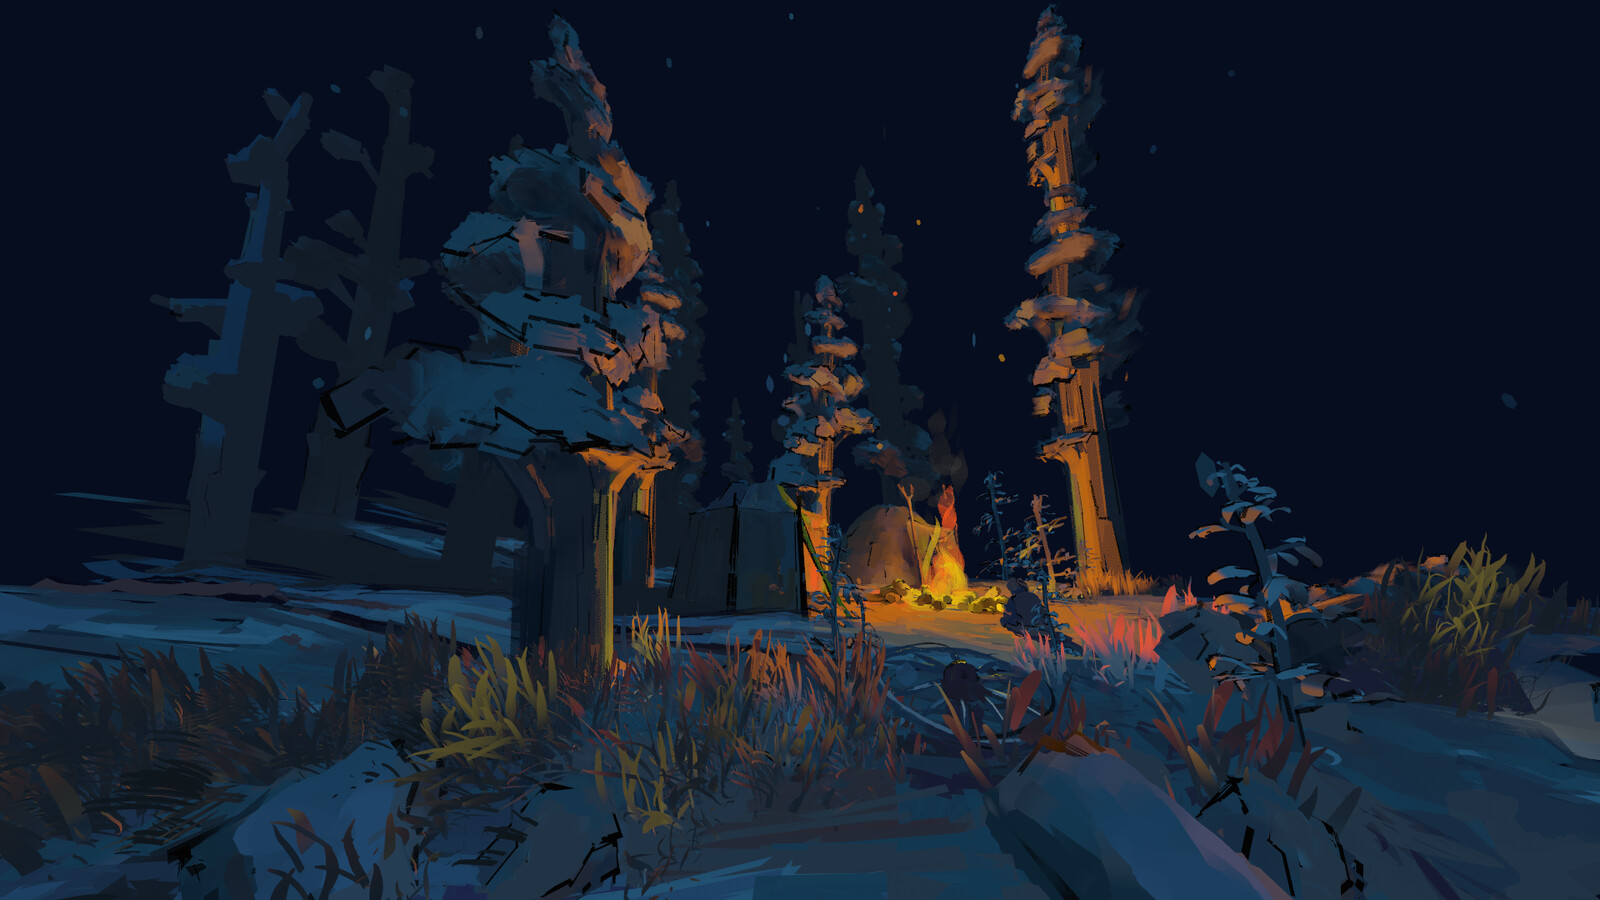 Campfire scene painted in VR using Quill